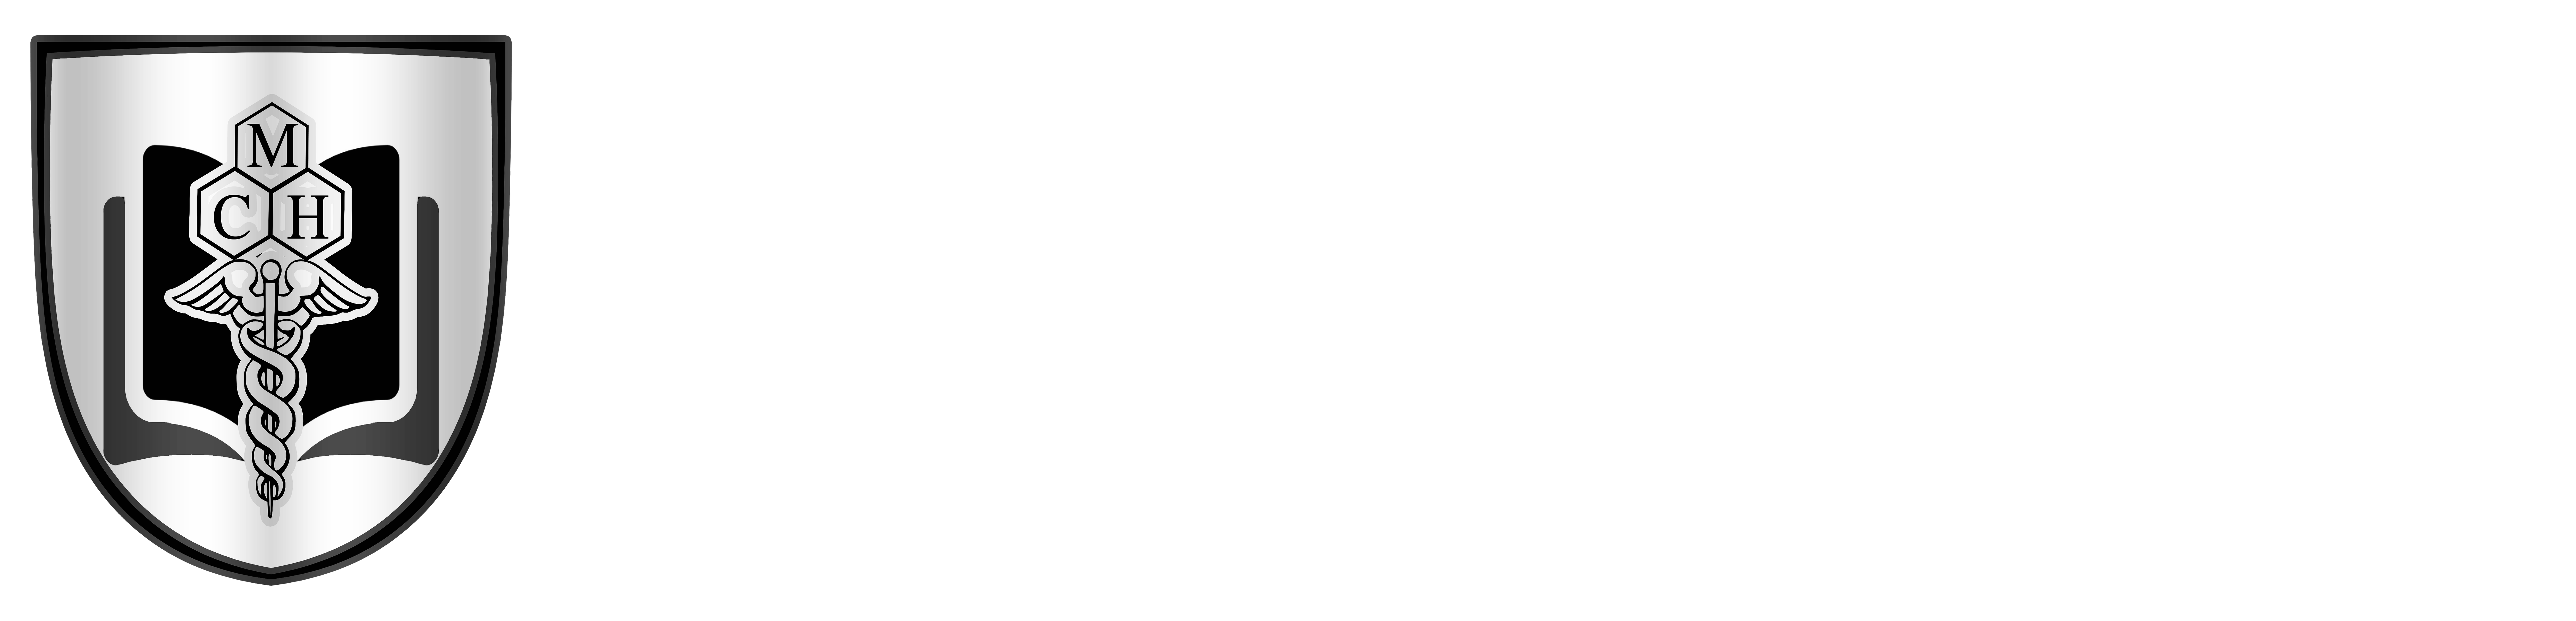 mch-logo_bw_name-on-right